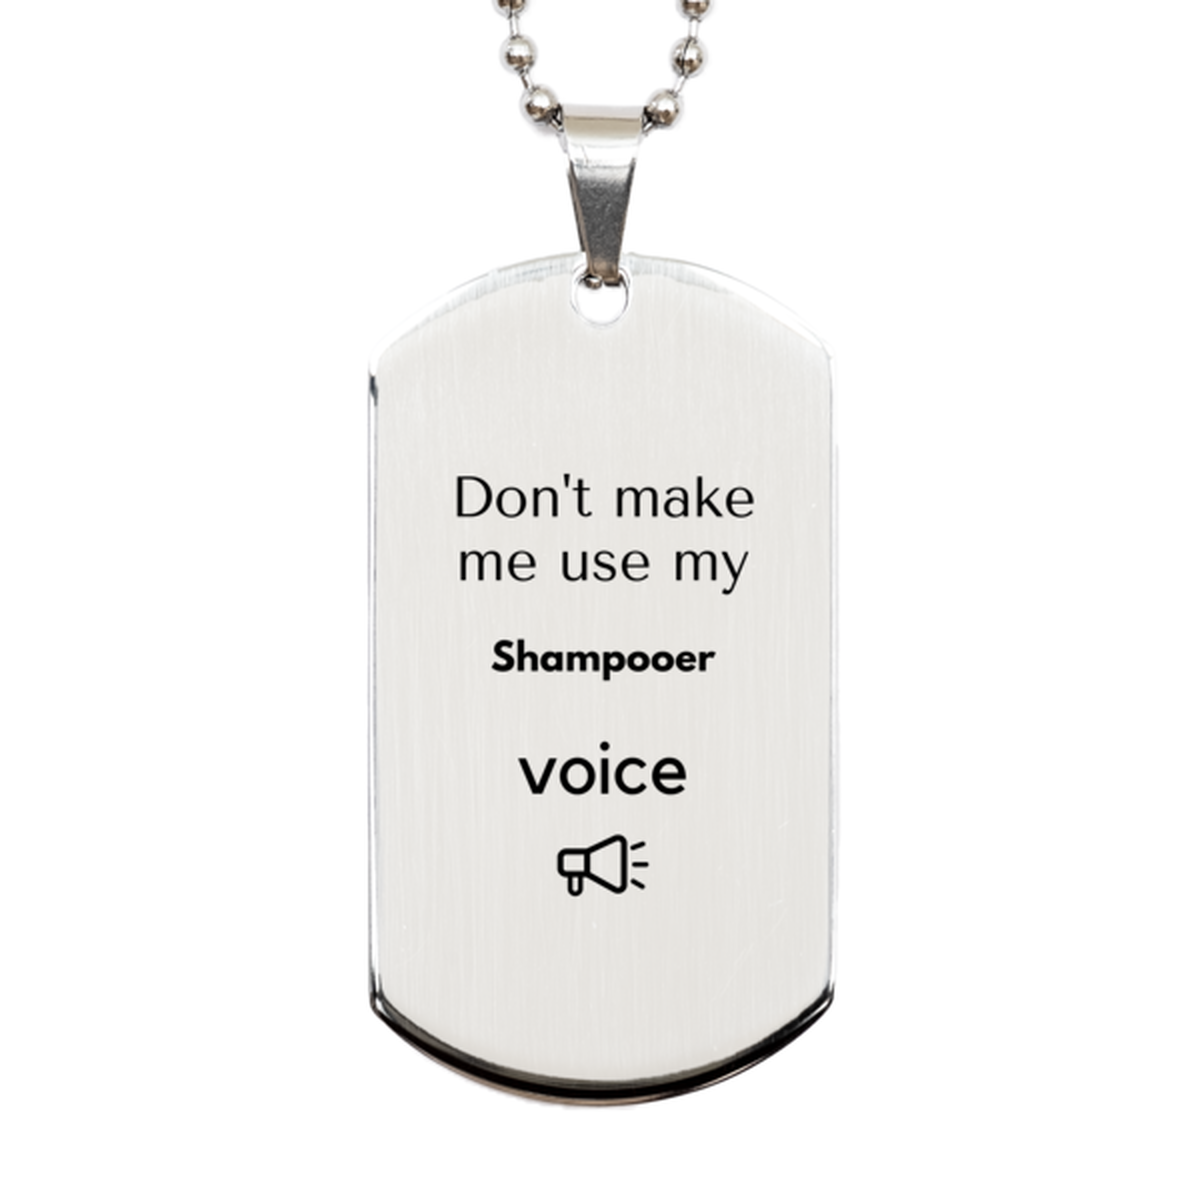 Don't make me use my Shampooer voice, Sarcasm Shampooer Gifts, Christmas Shampooer Silver Dog Tag Birthday Unique Gifts For Shampooer Coworkers, Men, Women, Colleague, Friends